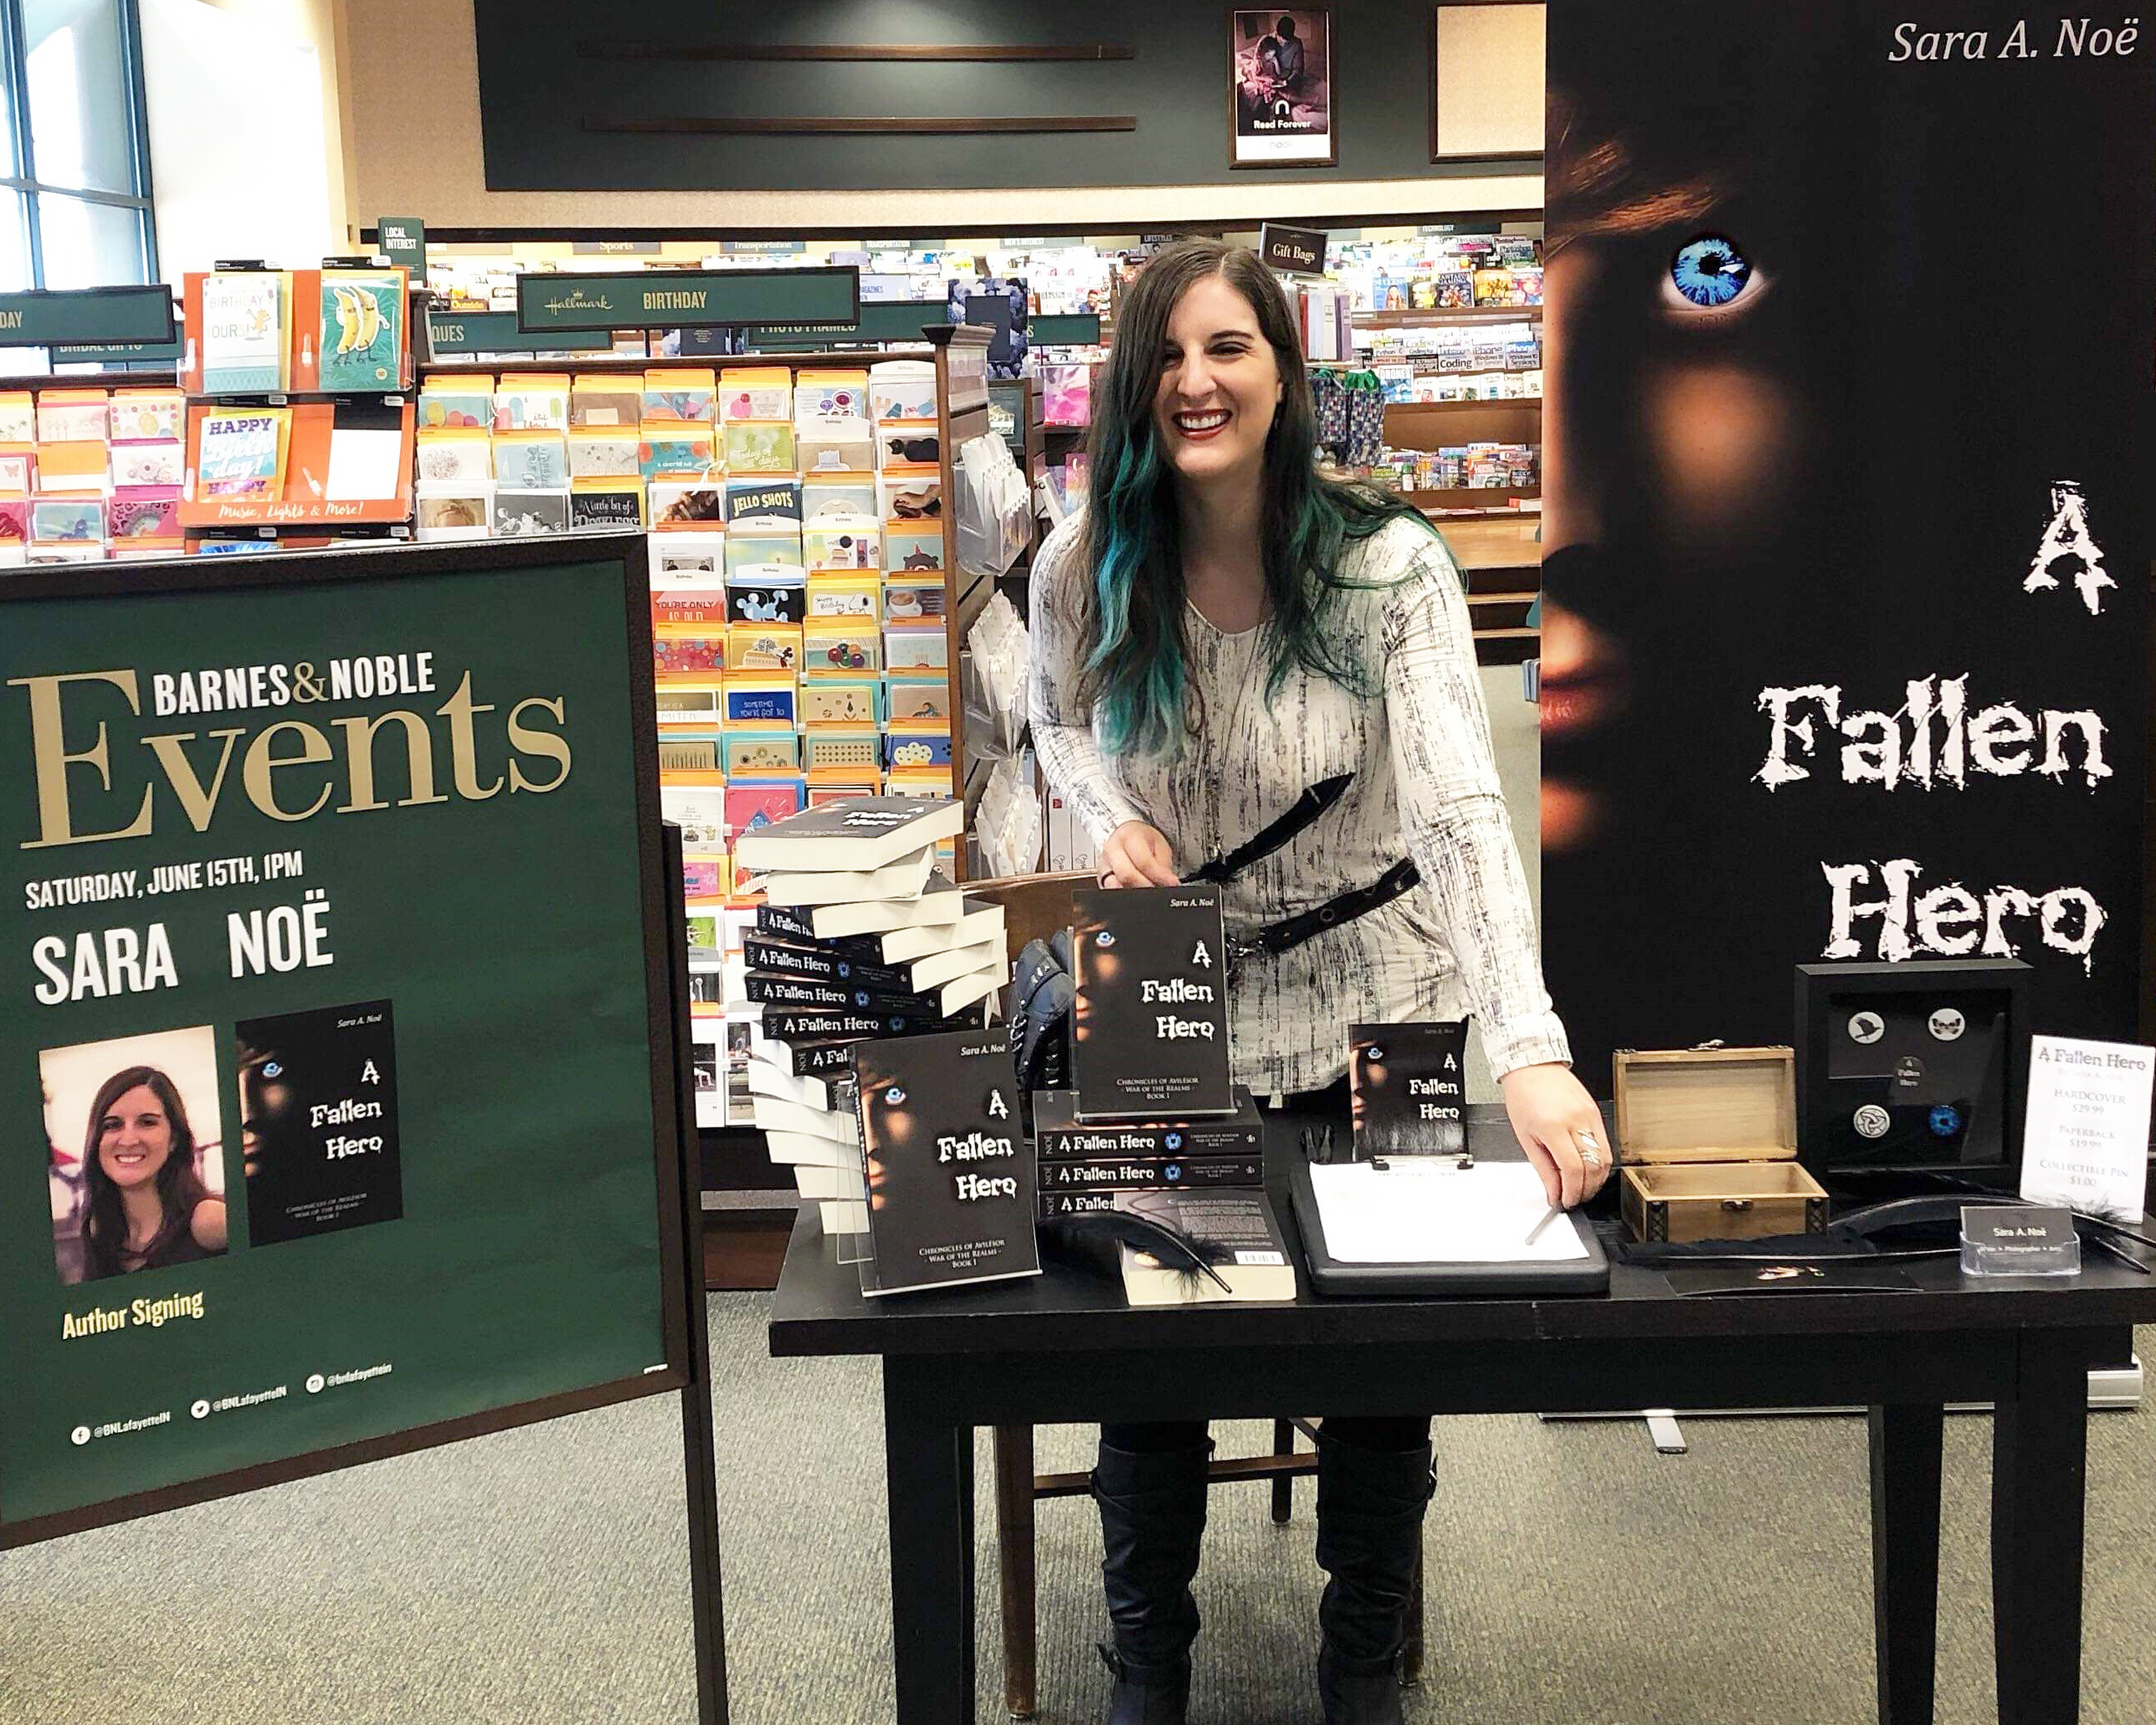 Author Sara A. Noe at a Barnes & Noble book signing for A Fallen Hero